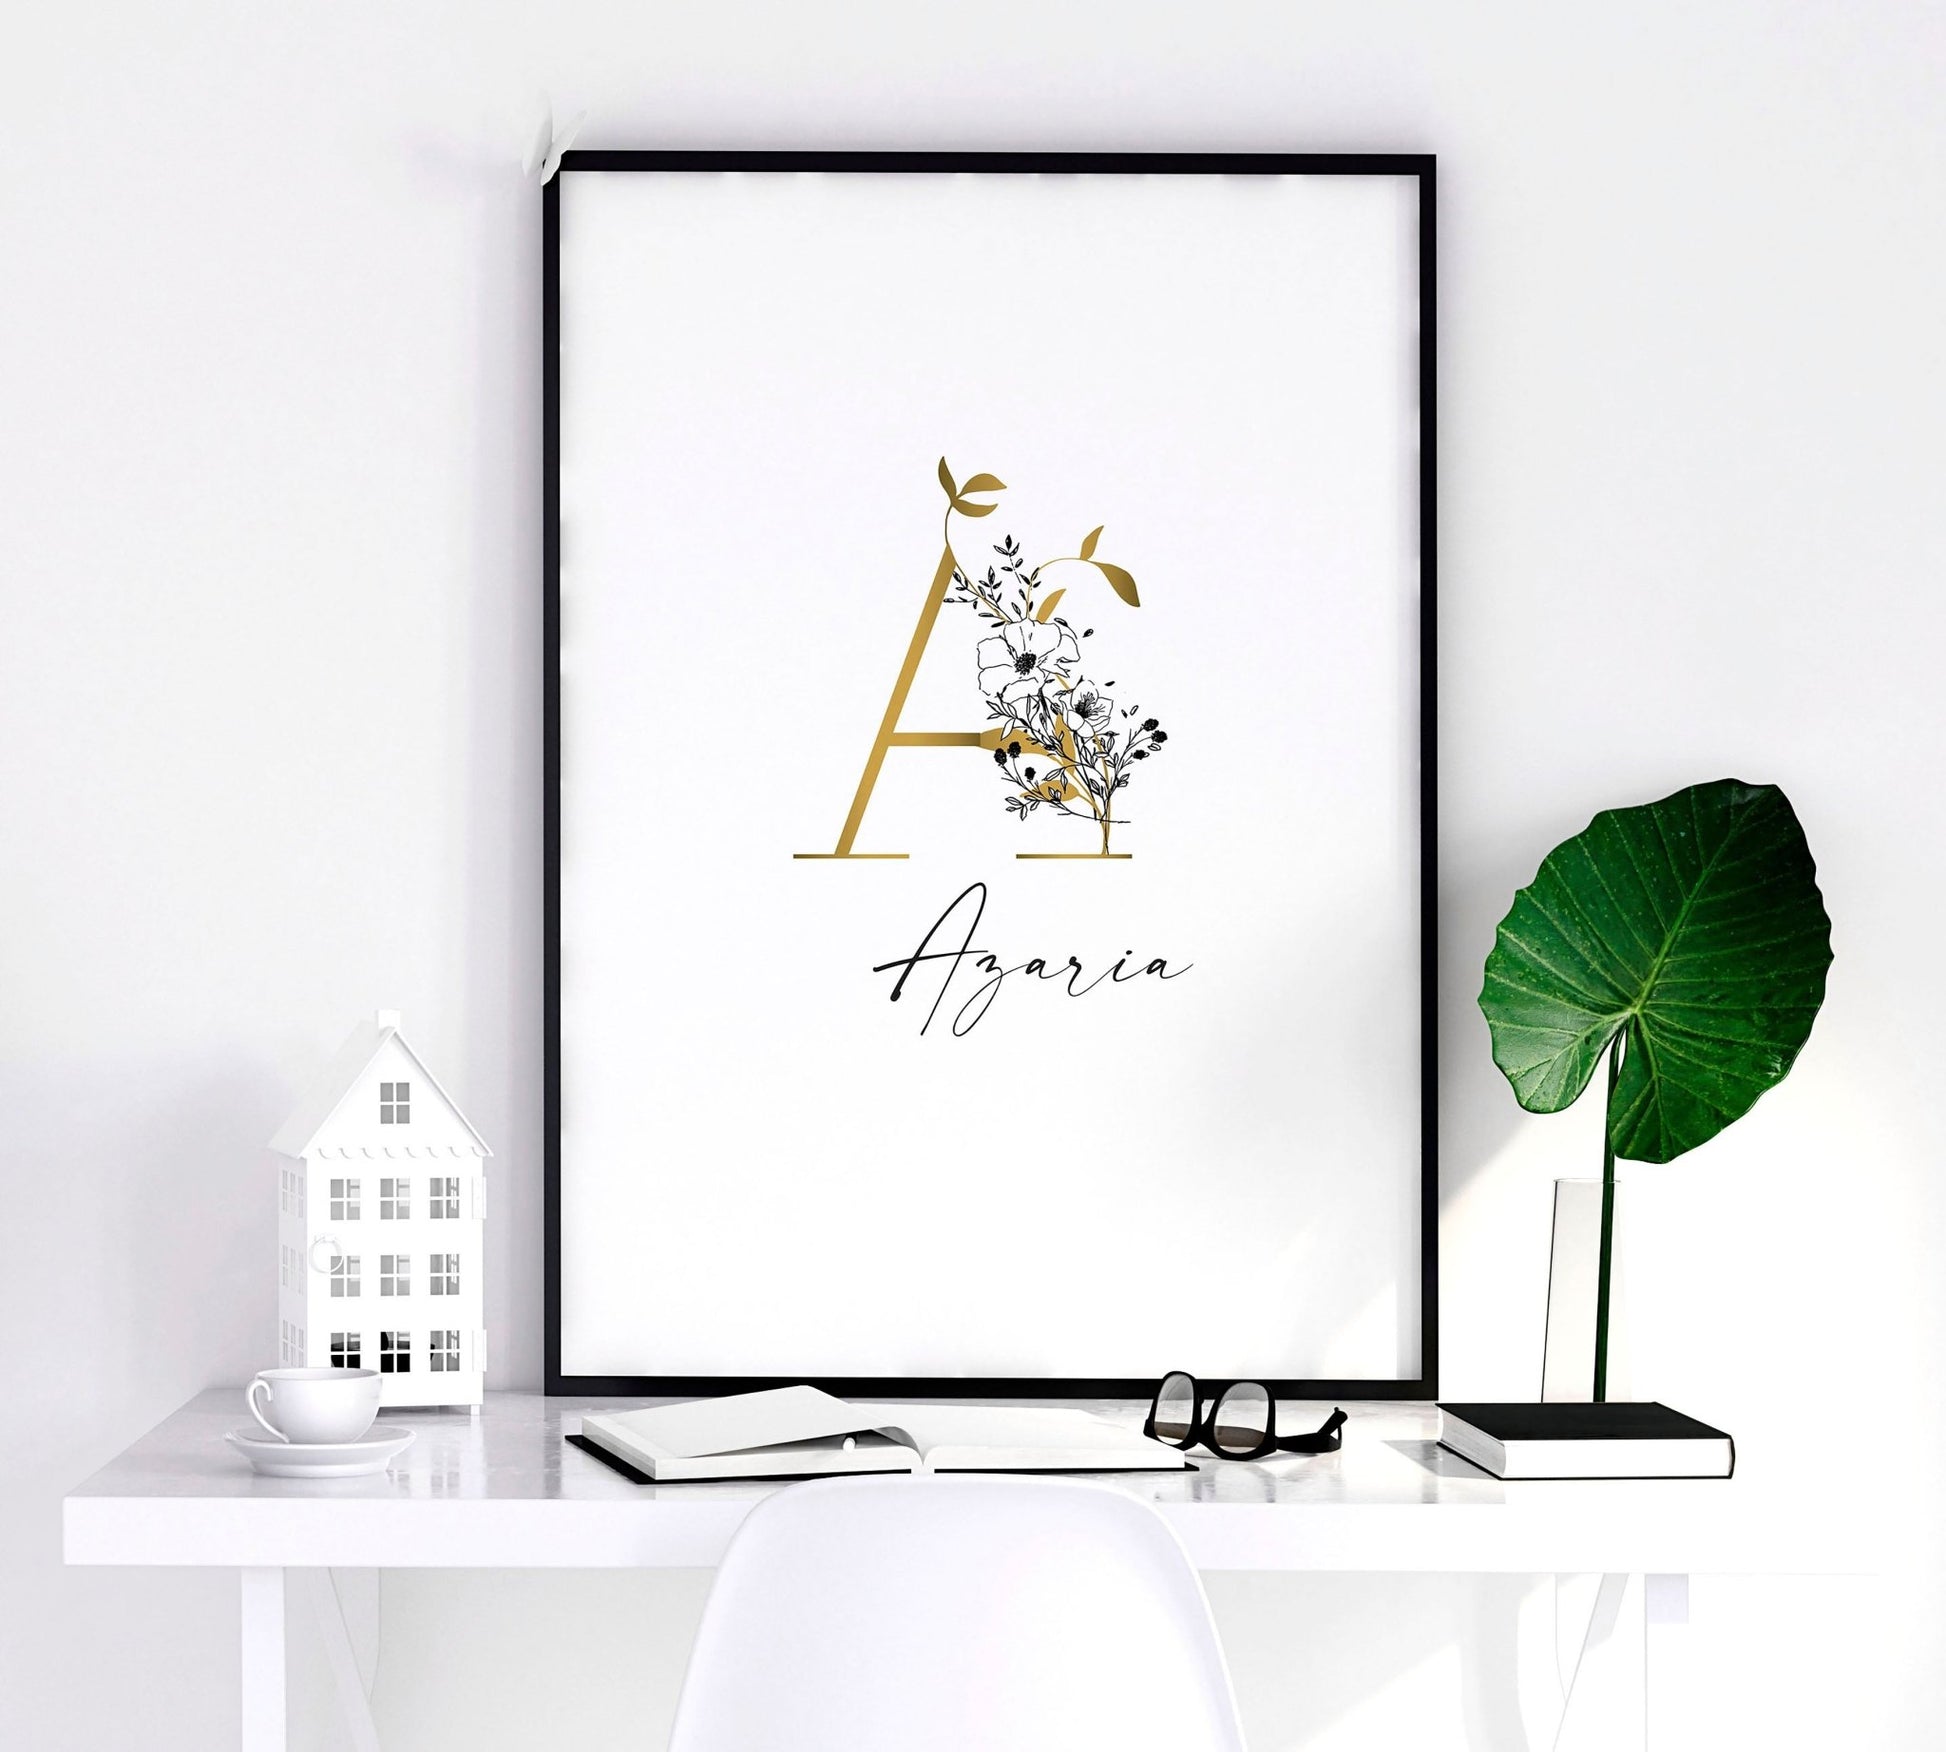 Personalised wedding anniversary gifts | set of 3 wall art prints - About Wall Art